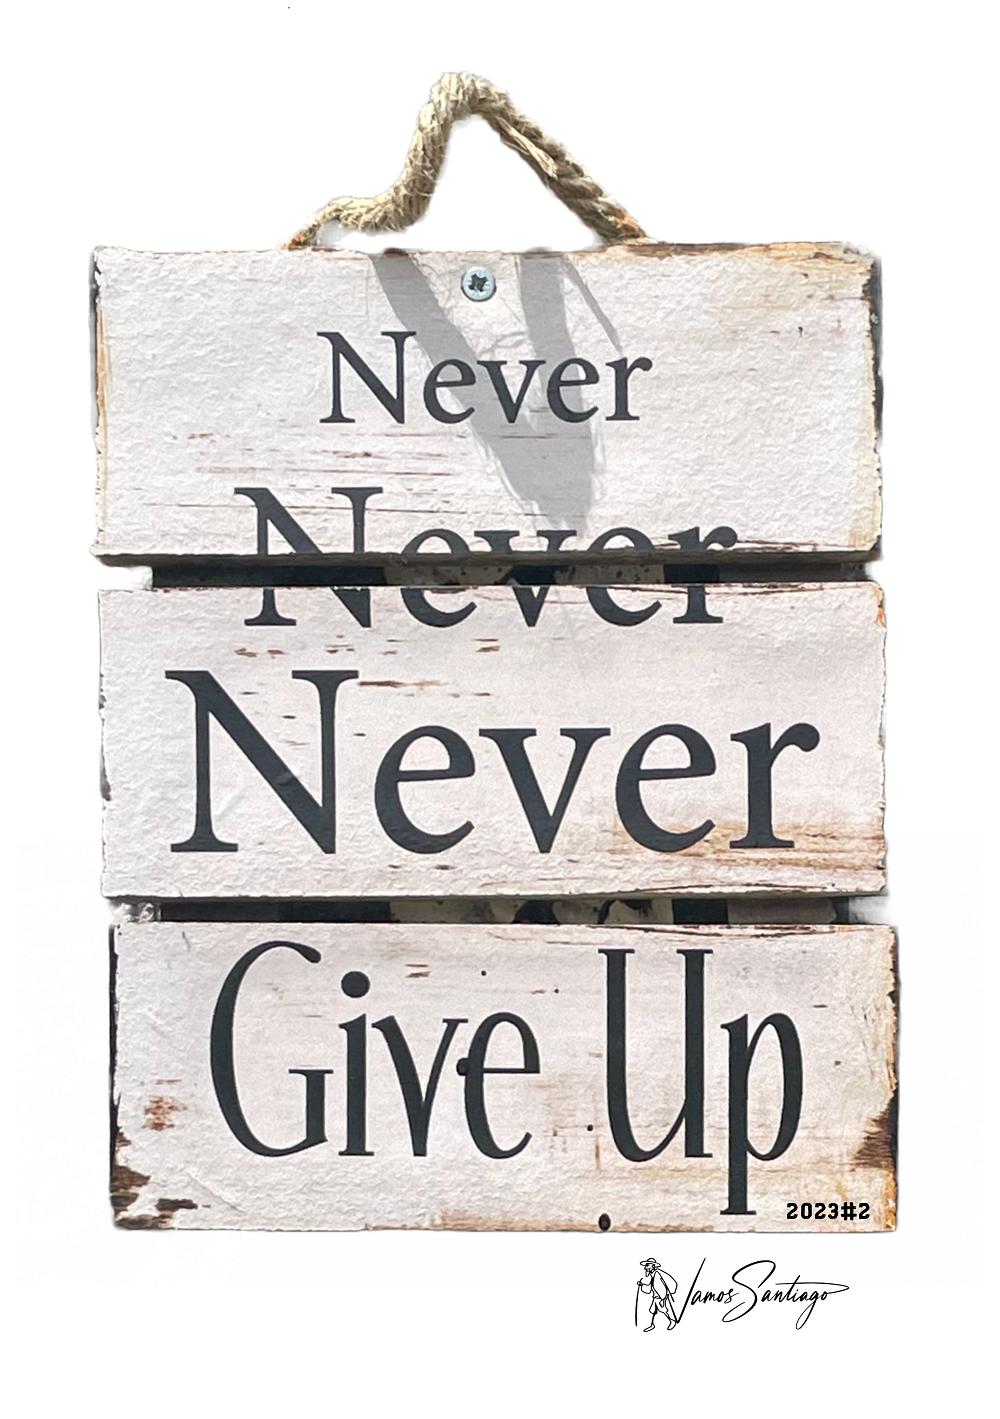 *Never give up* - canvas print